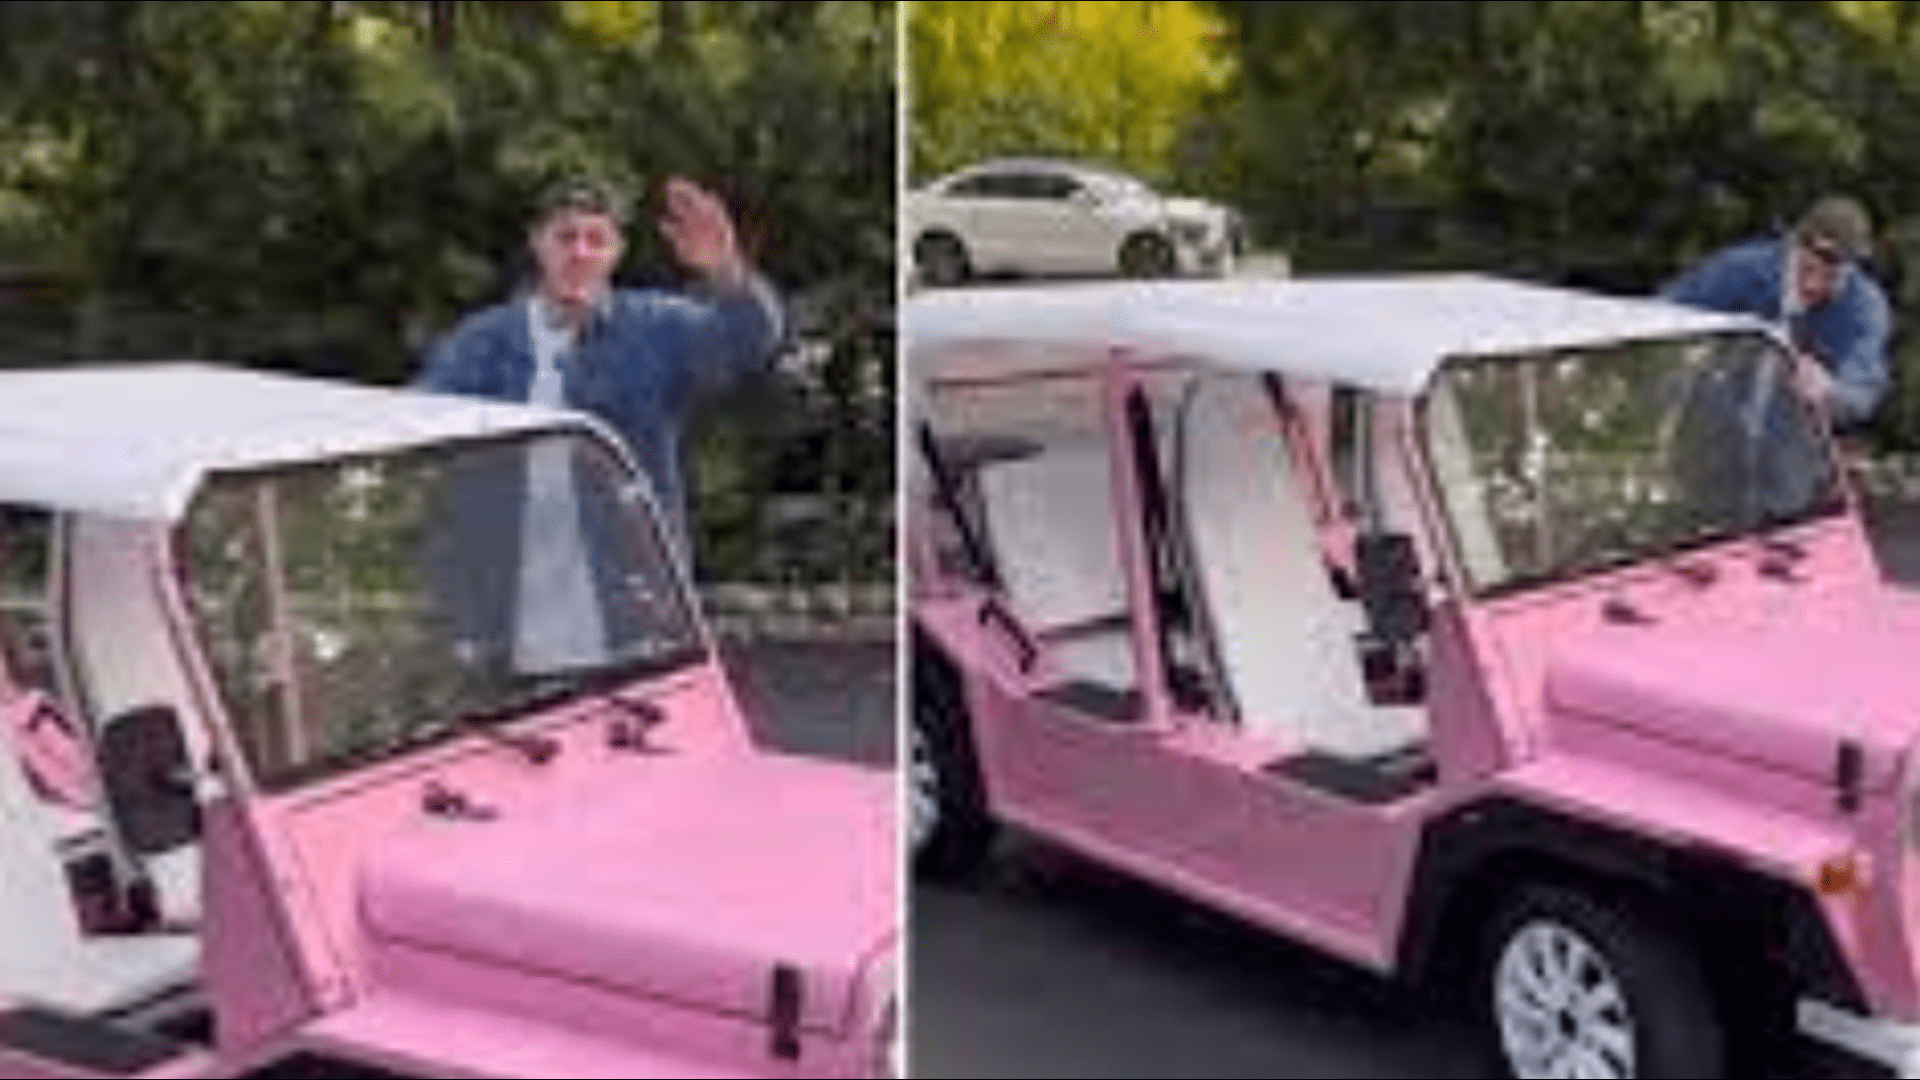 ”during-the-joy-ride-in-pink-moke-car-pete-davidson-and-northwest-8-appear-together-in-the-first-photos”